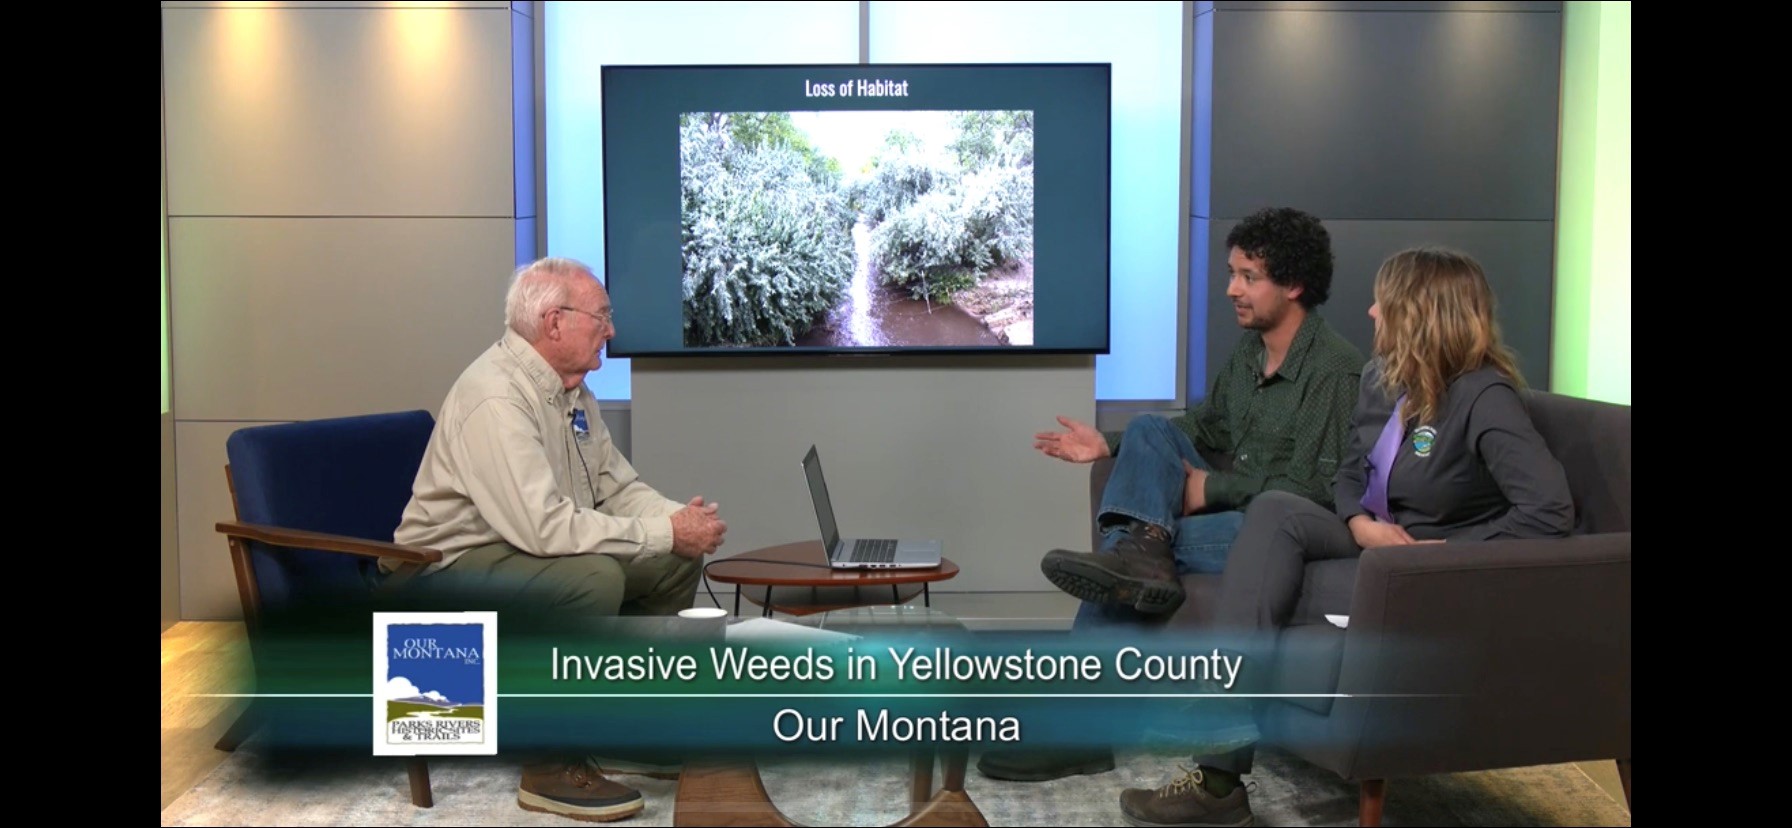 INVASIVE WEEDS IN YELLOWSTONE COUNTY